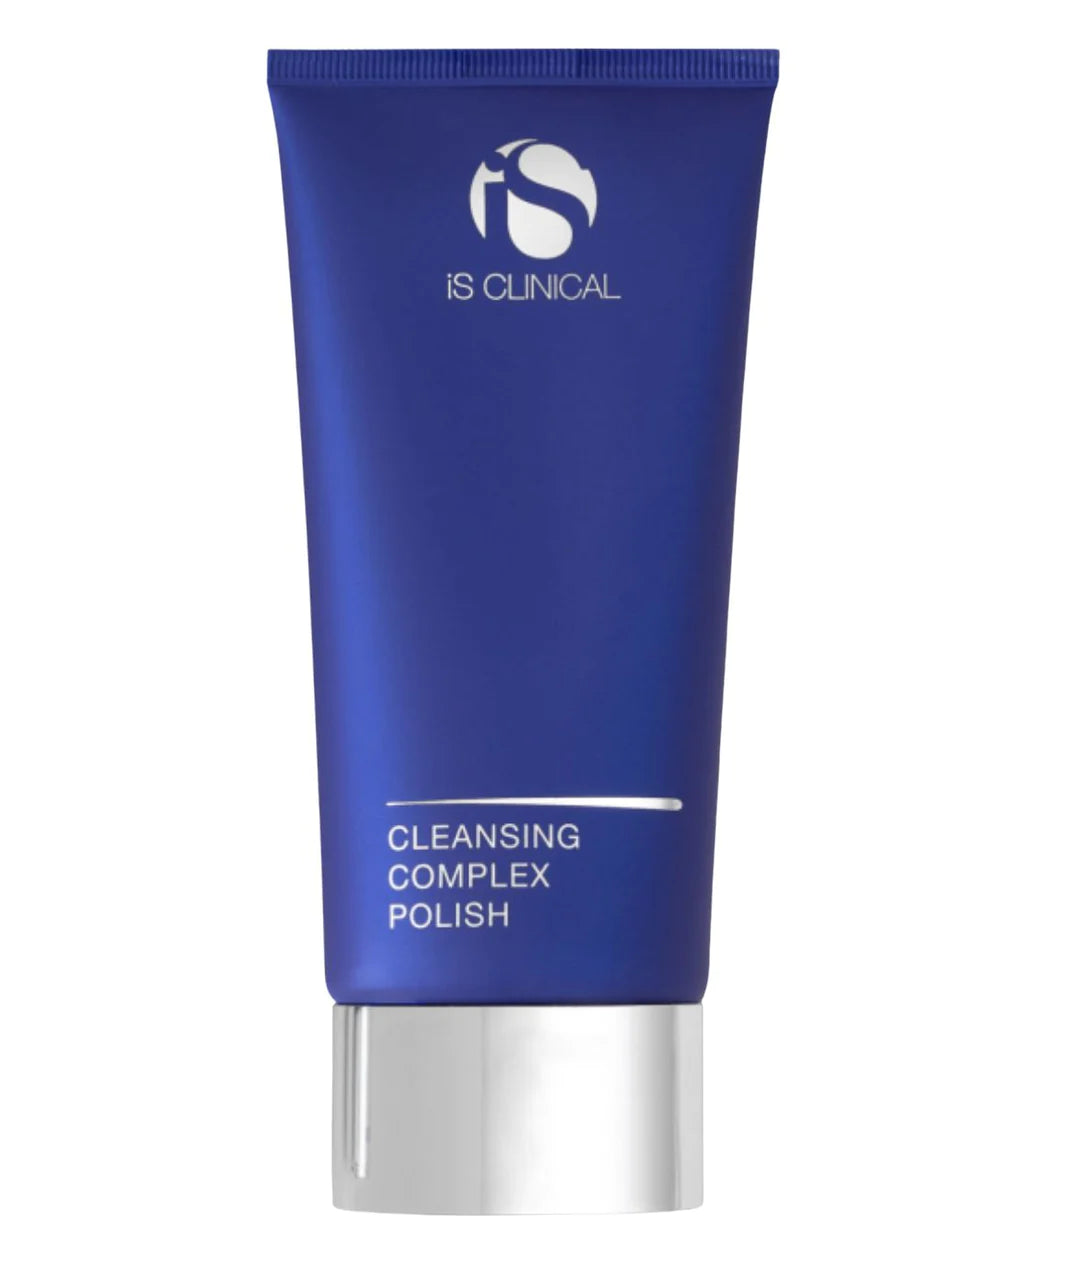 iS Clinical CLEANSING COMPLEX POLISH